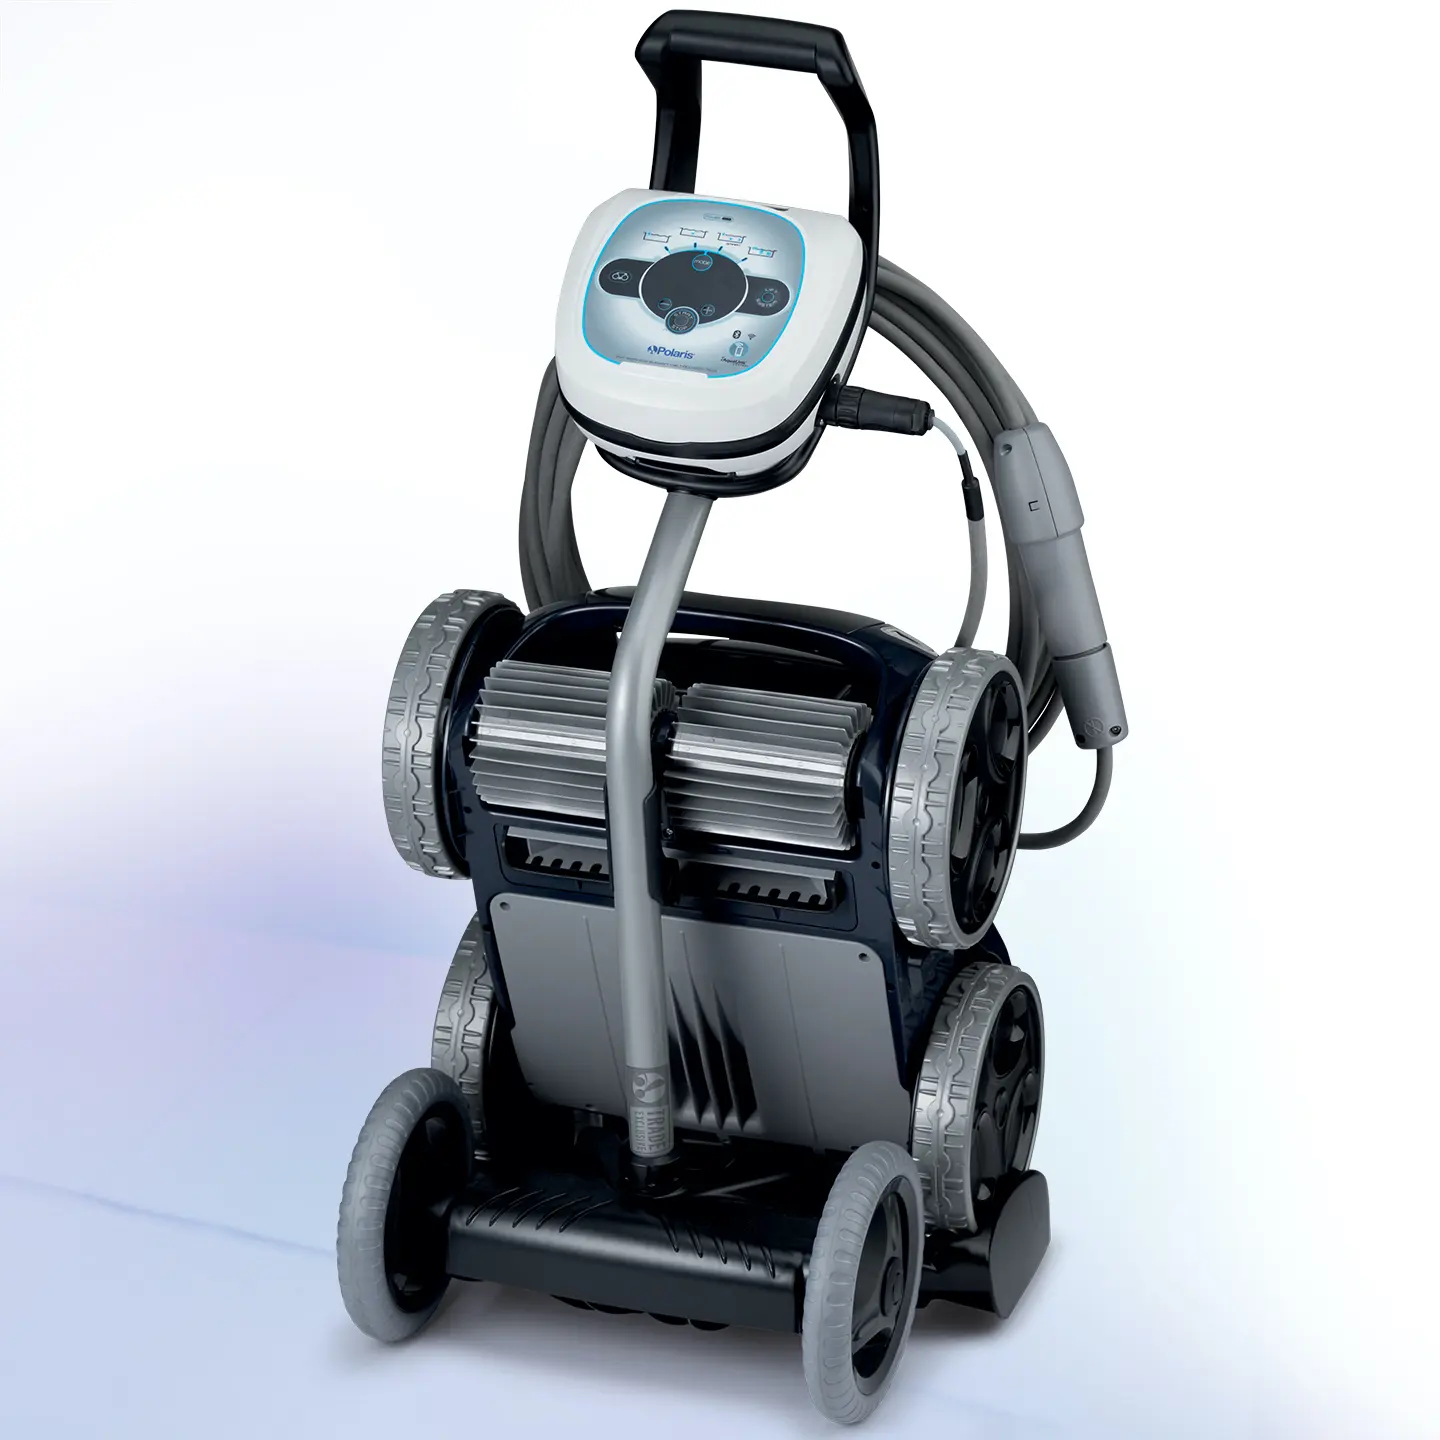 Discover Pla-Mor Automatic Pool Cleaners